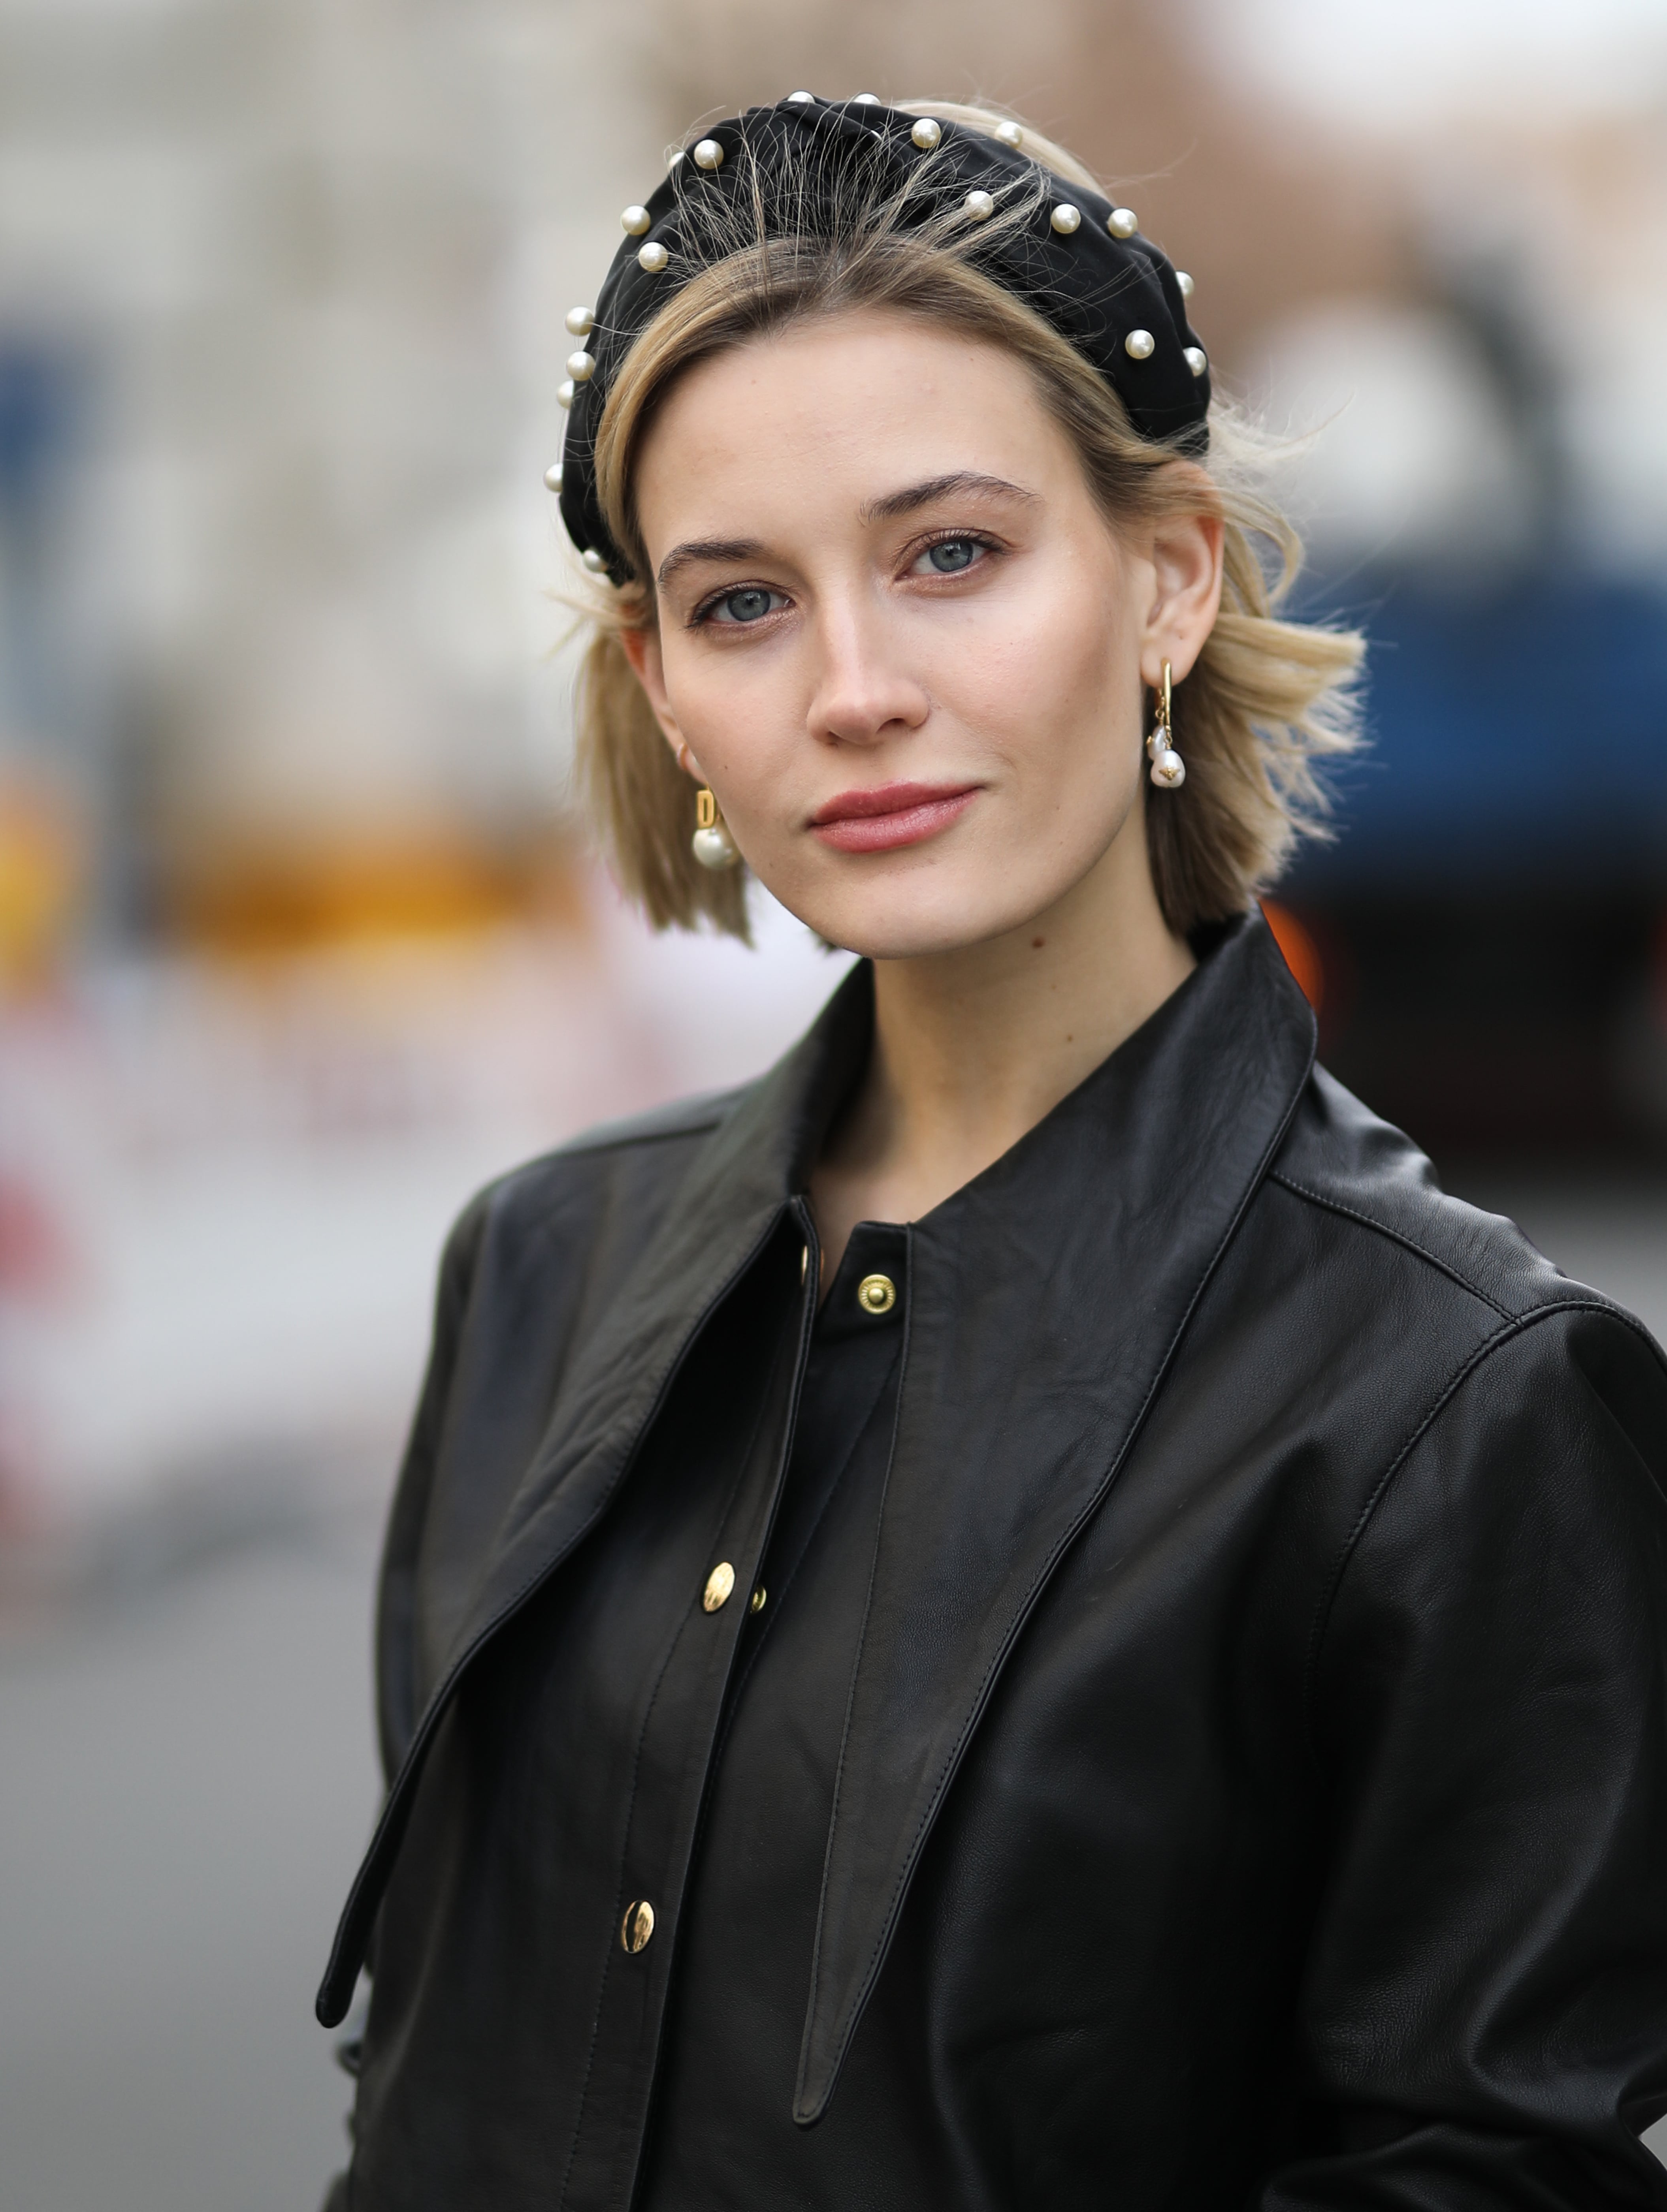 Velvet Headbands: A Must-Have Accessory for Festive Glamour